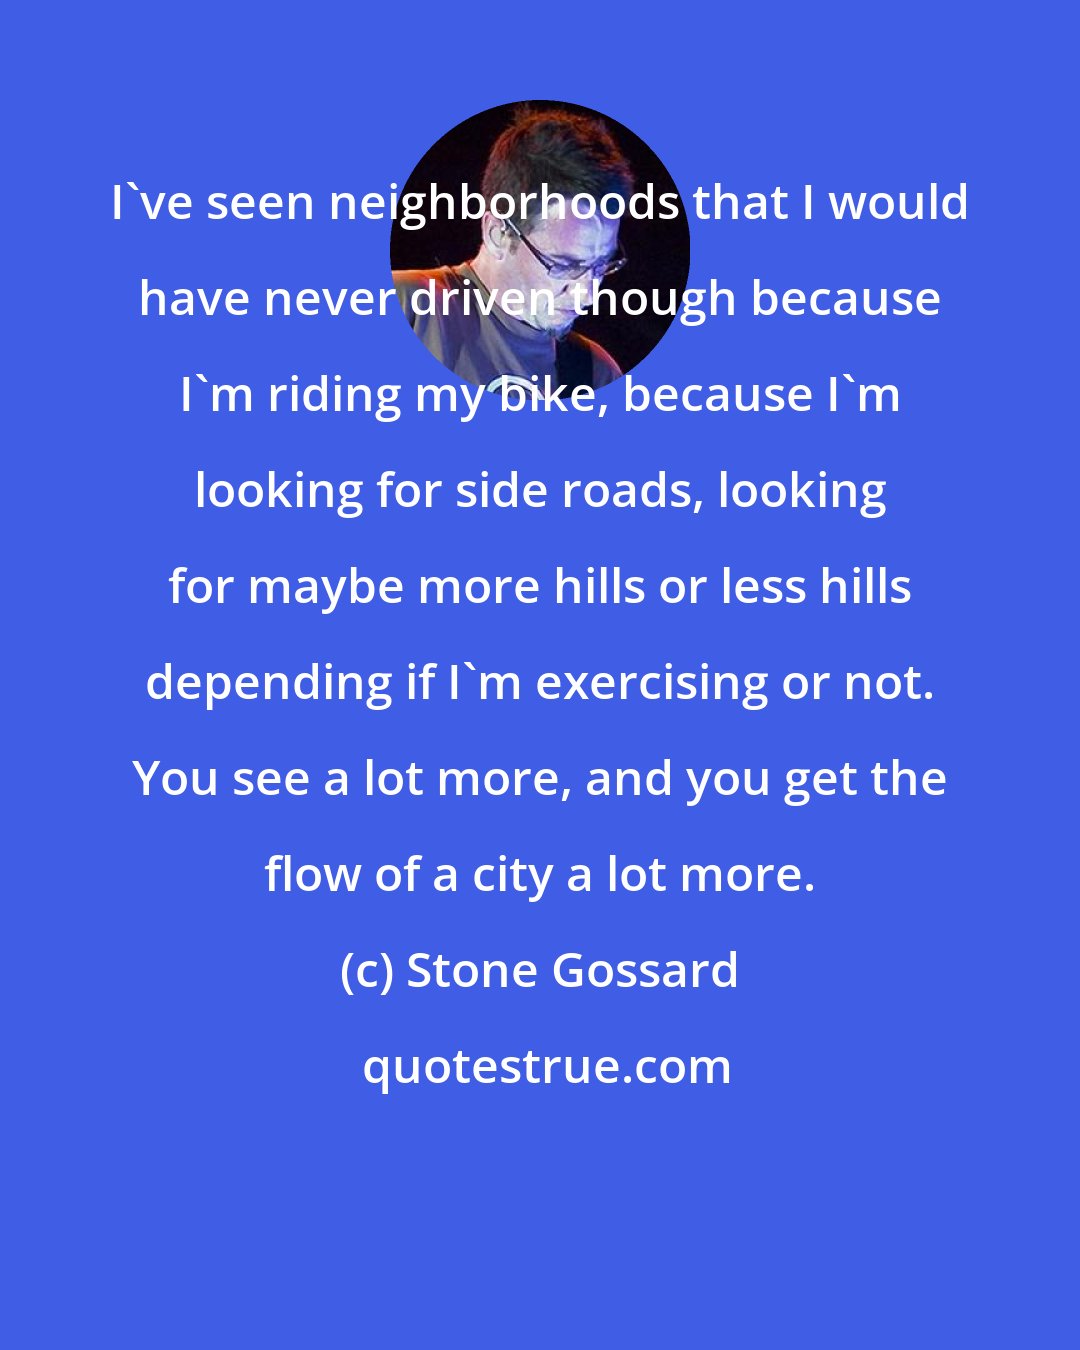 Stone Gossard: I've seen neighborhoods that I would have never driven though because I'm riding my bike, because I'm looking for side roads, looking for maybe more hills or less hills depending if I'm exercising or not. You see a lot more, and you get the flow of a city a lot more.